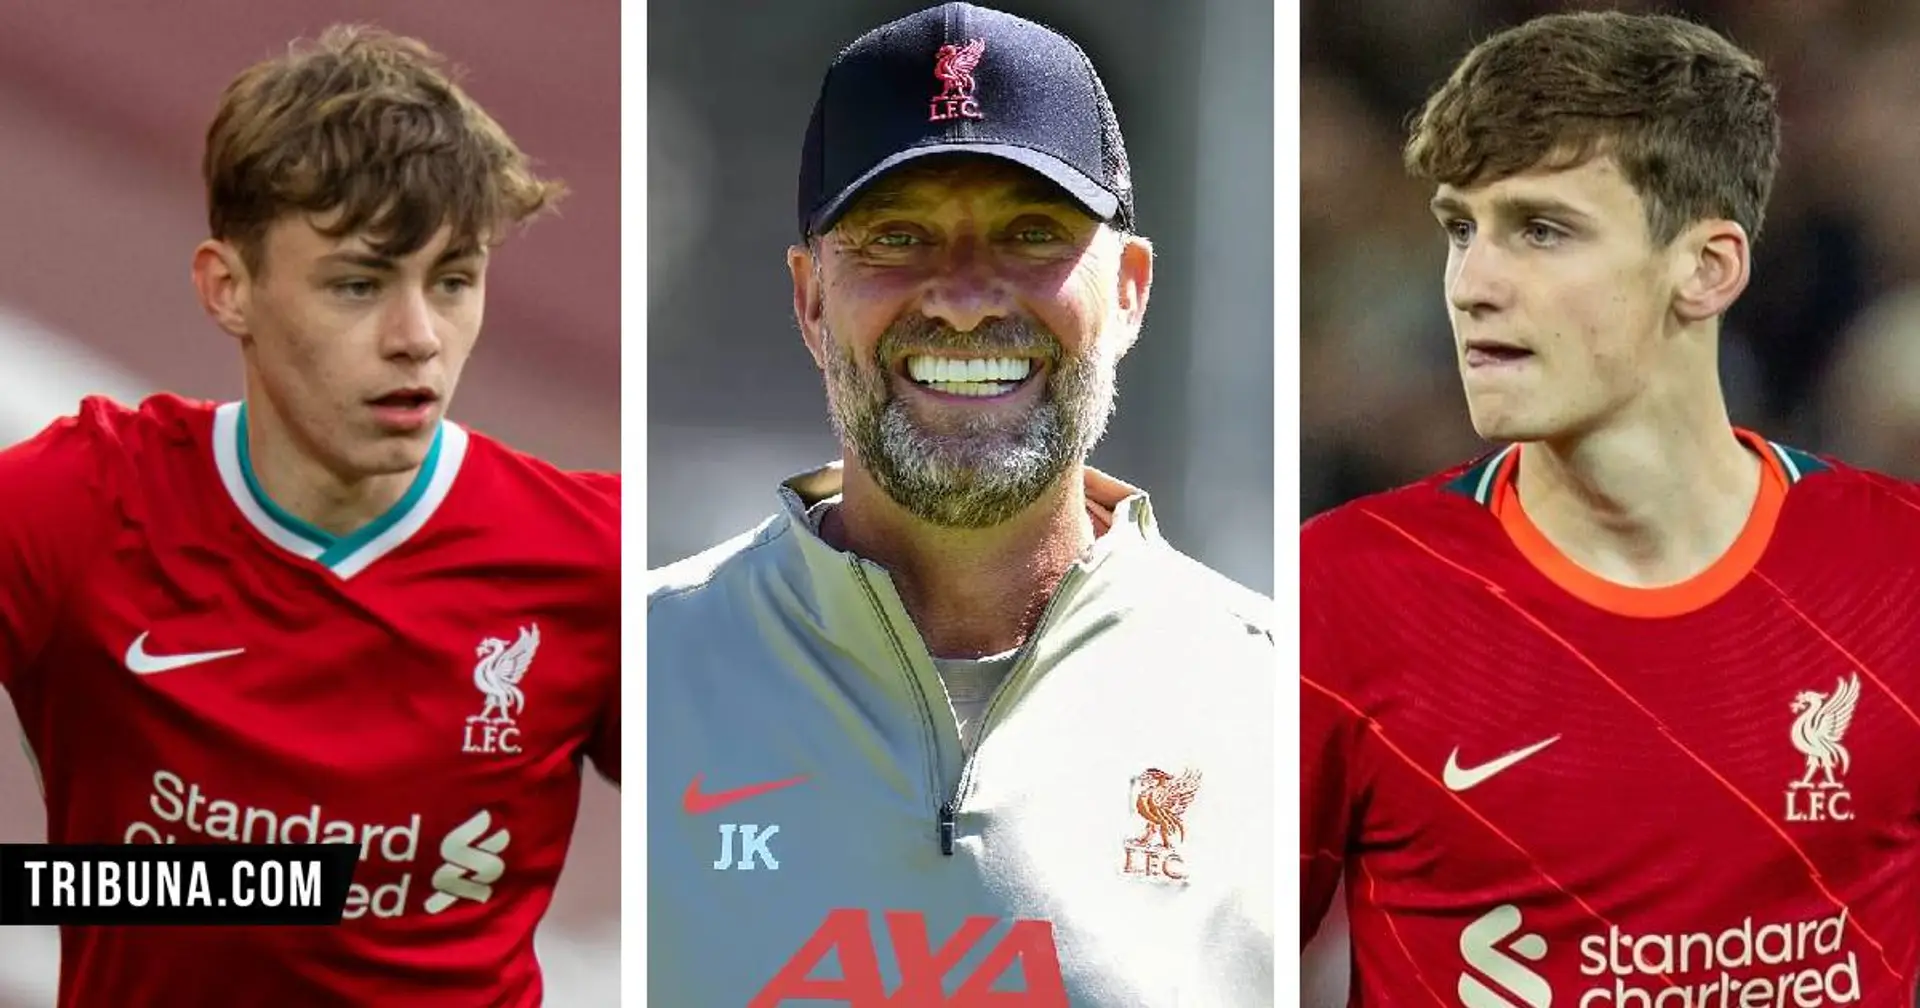 Klopp could hand out 7 Champions League debuts with top spot secured - players' names revealed 